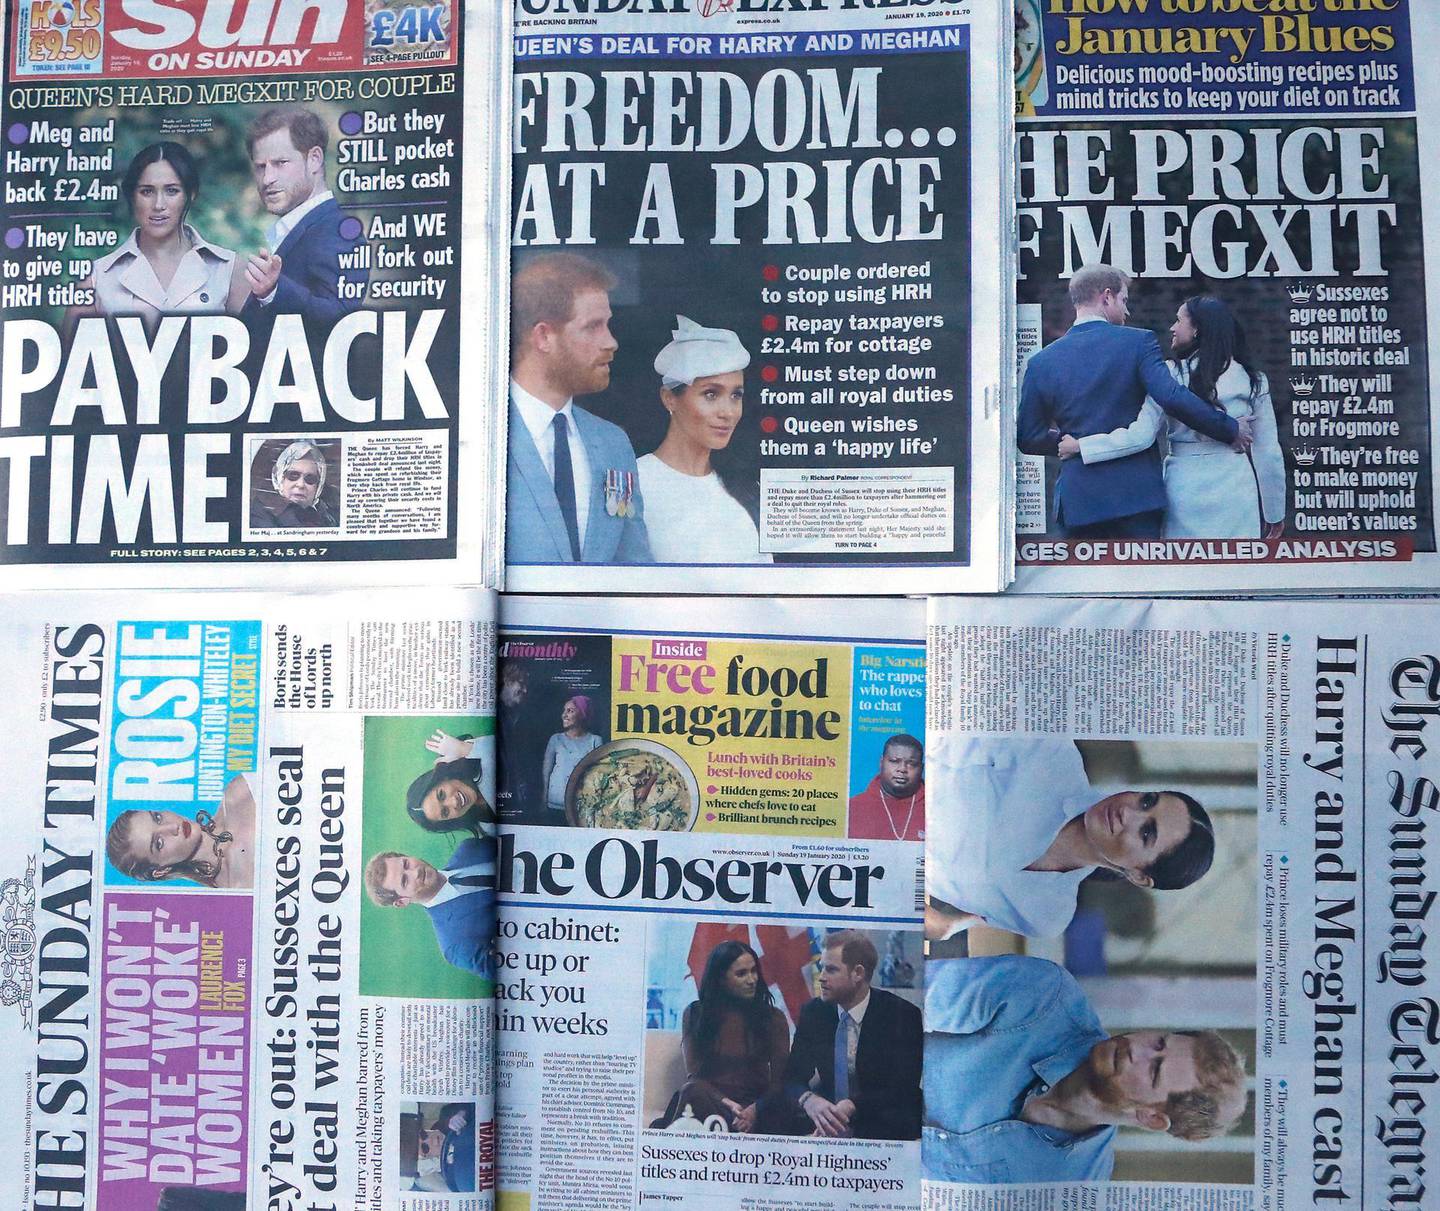 The front pages of London's Sunday newspapers are displayed in London, Sunday, Jan. 19, 2020. The papers fronted the news that Buckingham Palace says Prince Harry and his wife, Meghan, will no longer use the titles "royal highness" or receive public funds for their work under a deal that allows them to step aside as senior royals. (AP Photo/Frank Augstein)